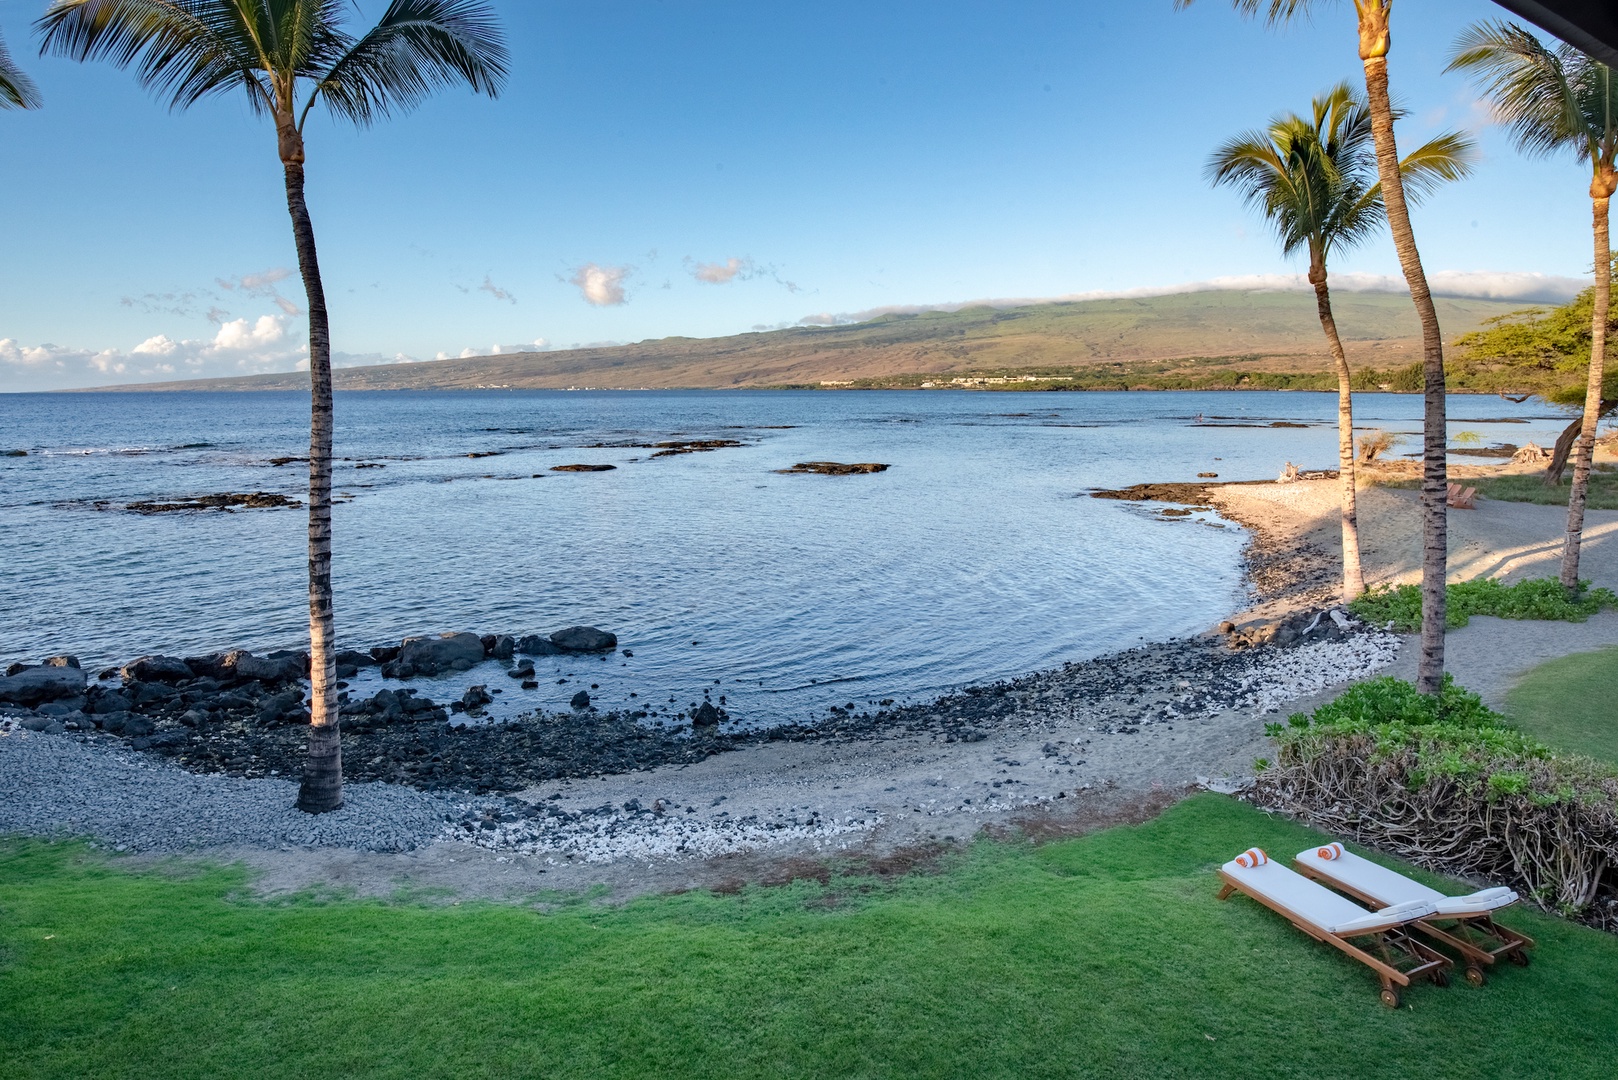 Kamuela Vacation Rentals, 3BD Estate Home at Puako Bay (10D) - View from Upstairs Primary Bedroom Lanai Looking onto the Lawn, Ocean and Kohala Mountains